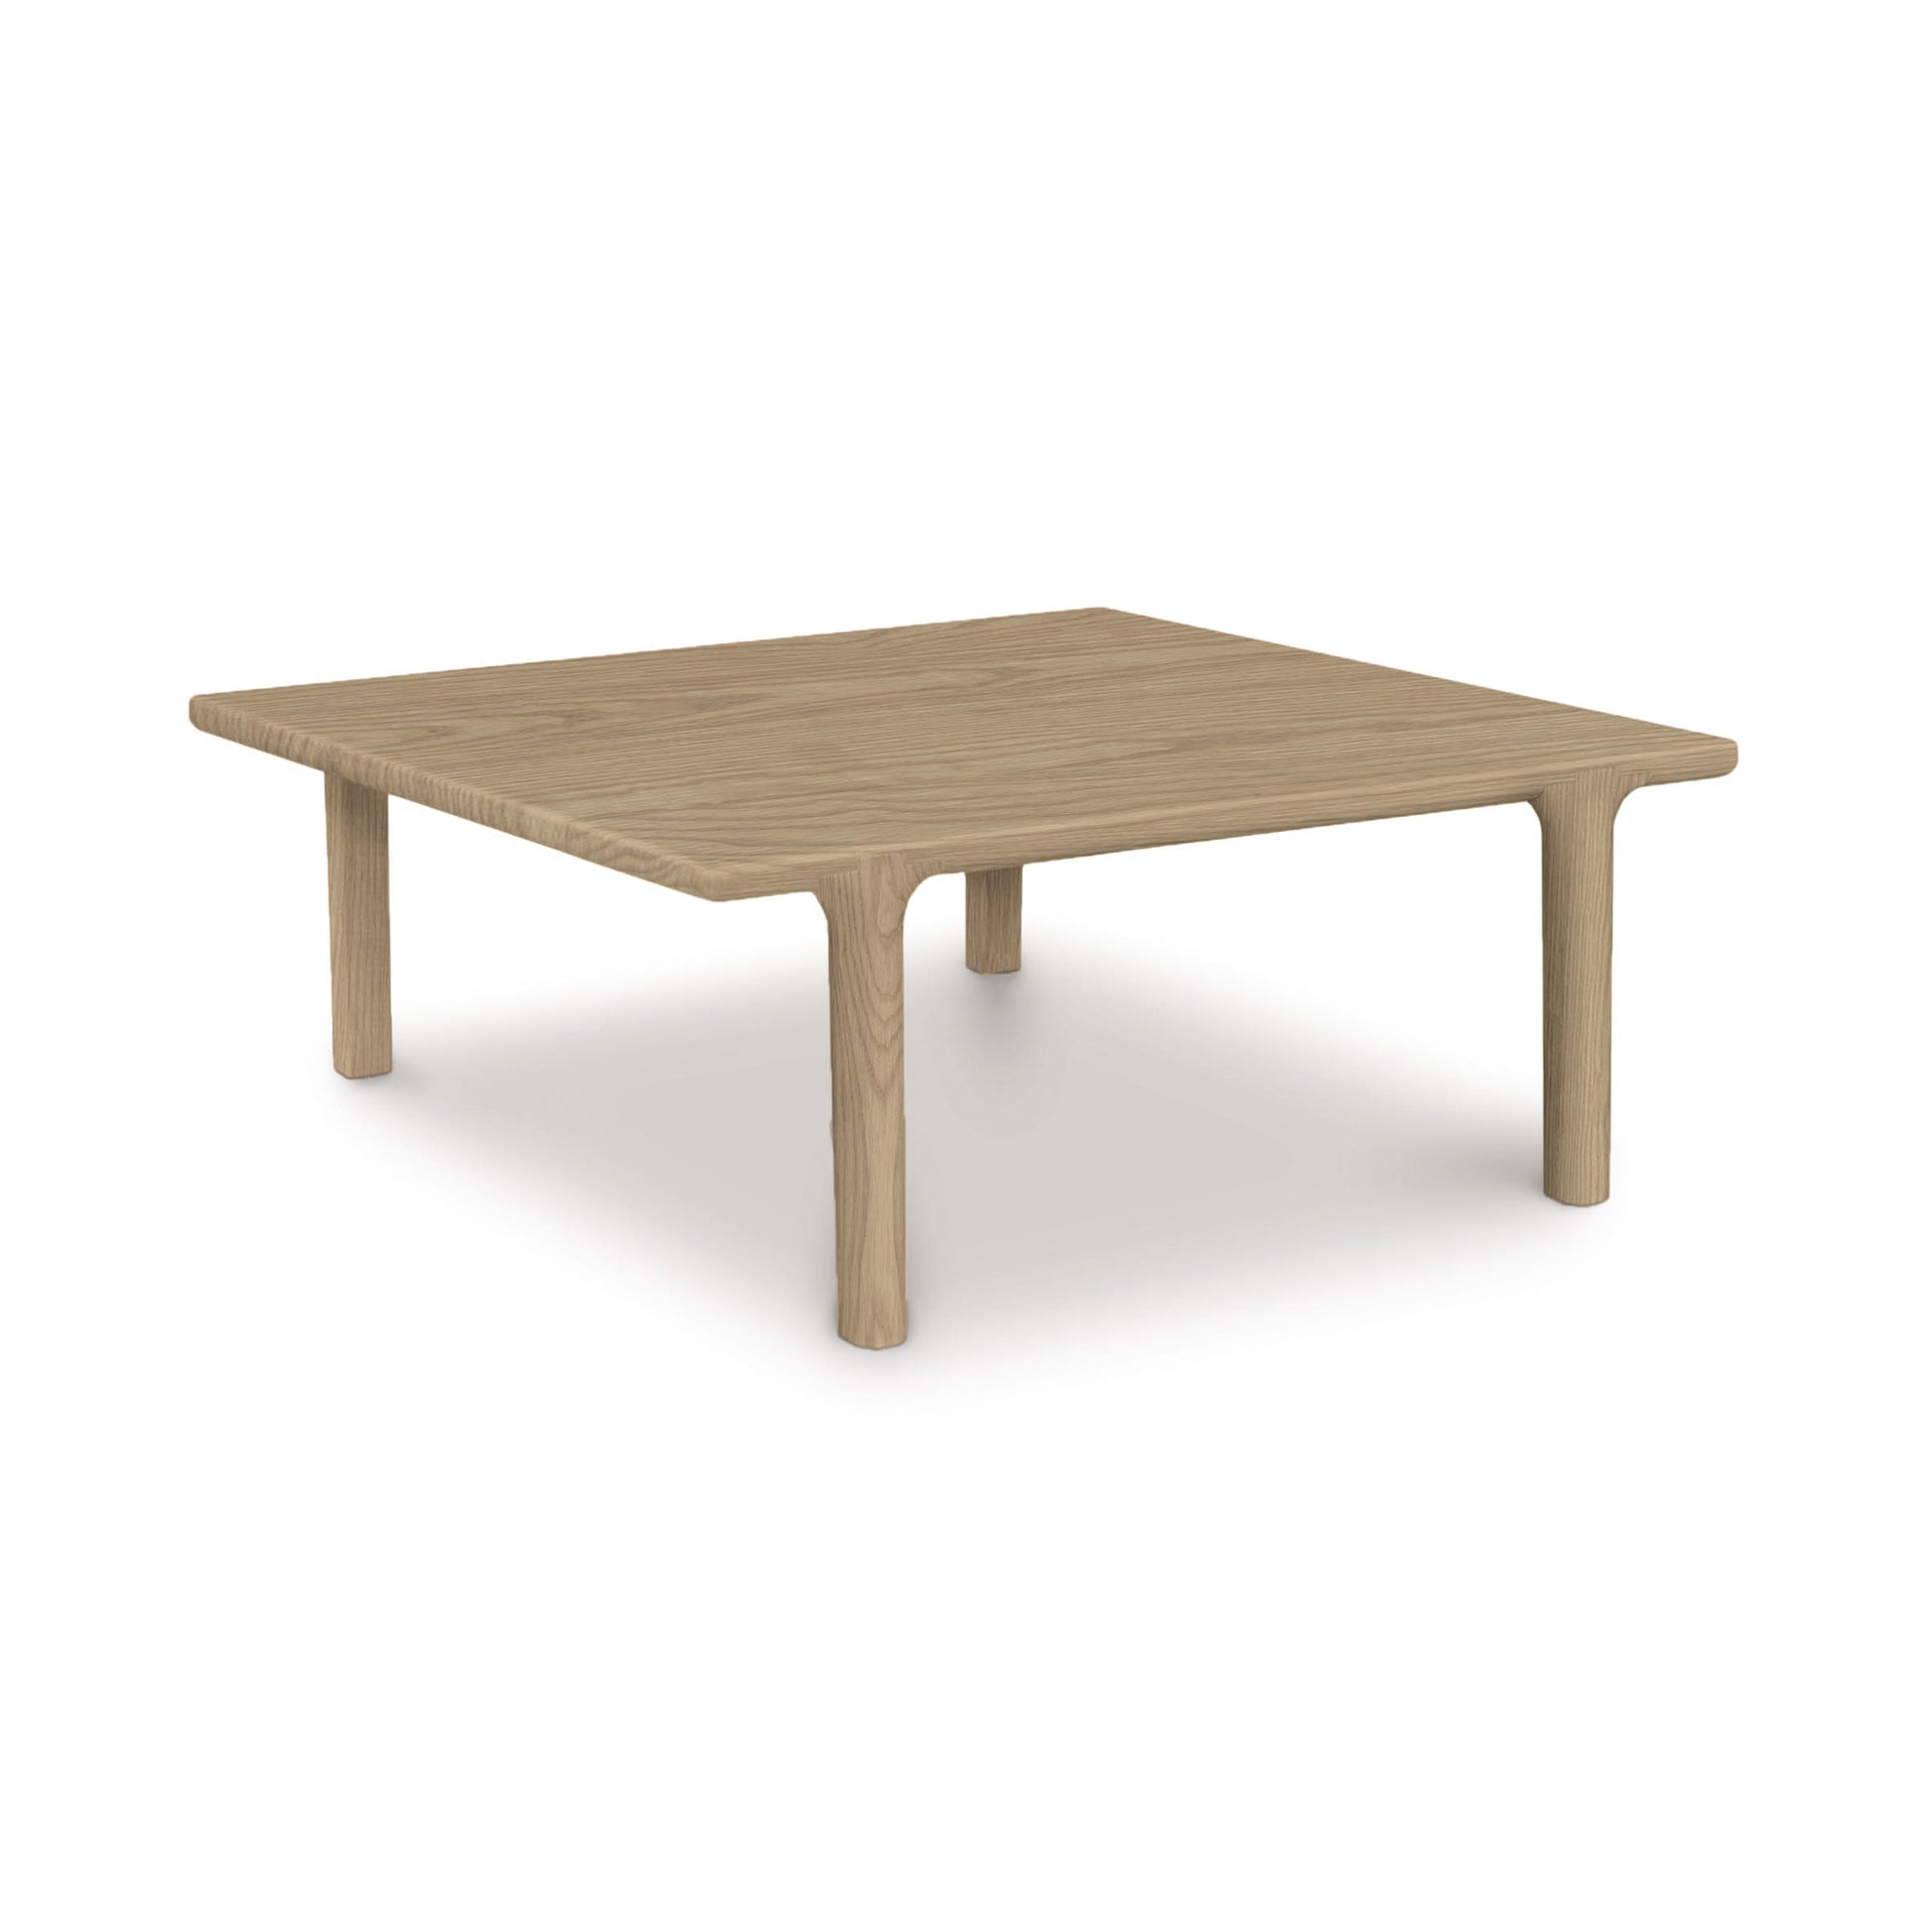 A contemporary design Copeland Furniture Sierra Square Coffee Table, crafted from North American hardwood, with square edges and four sturdy legs on a white background.